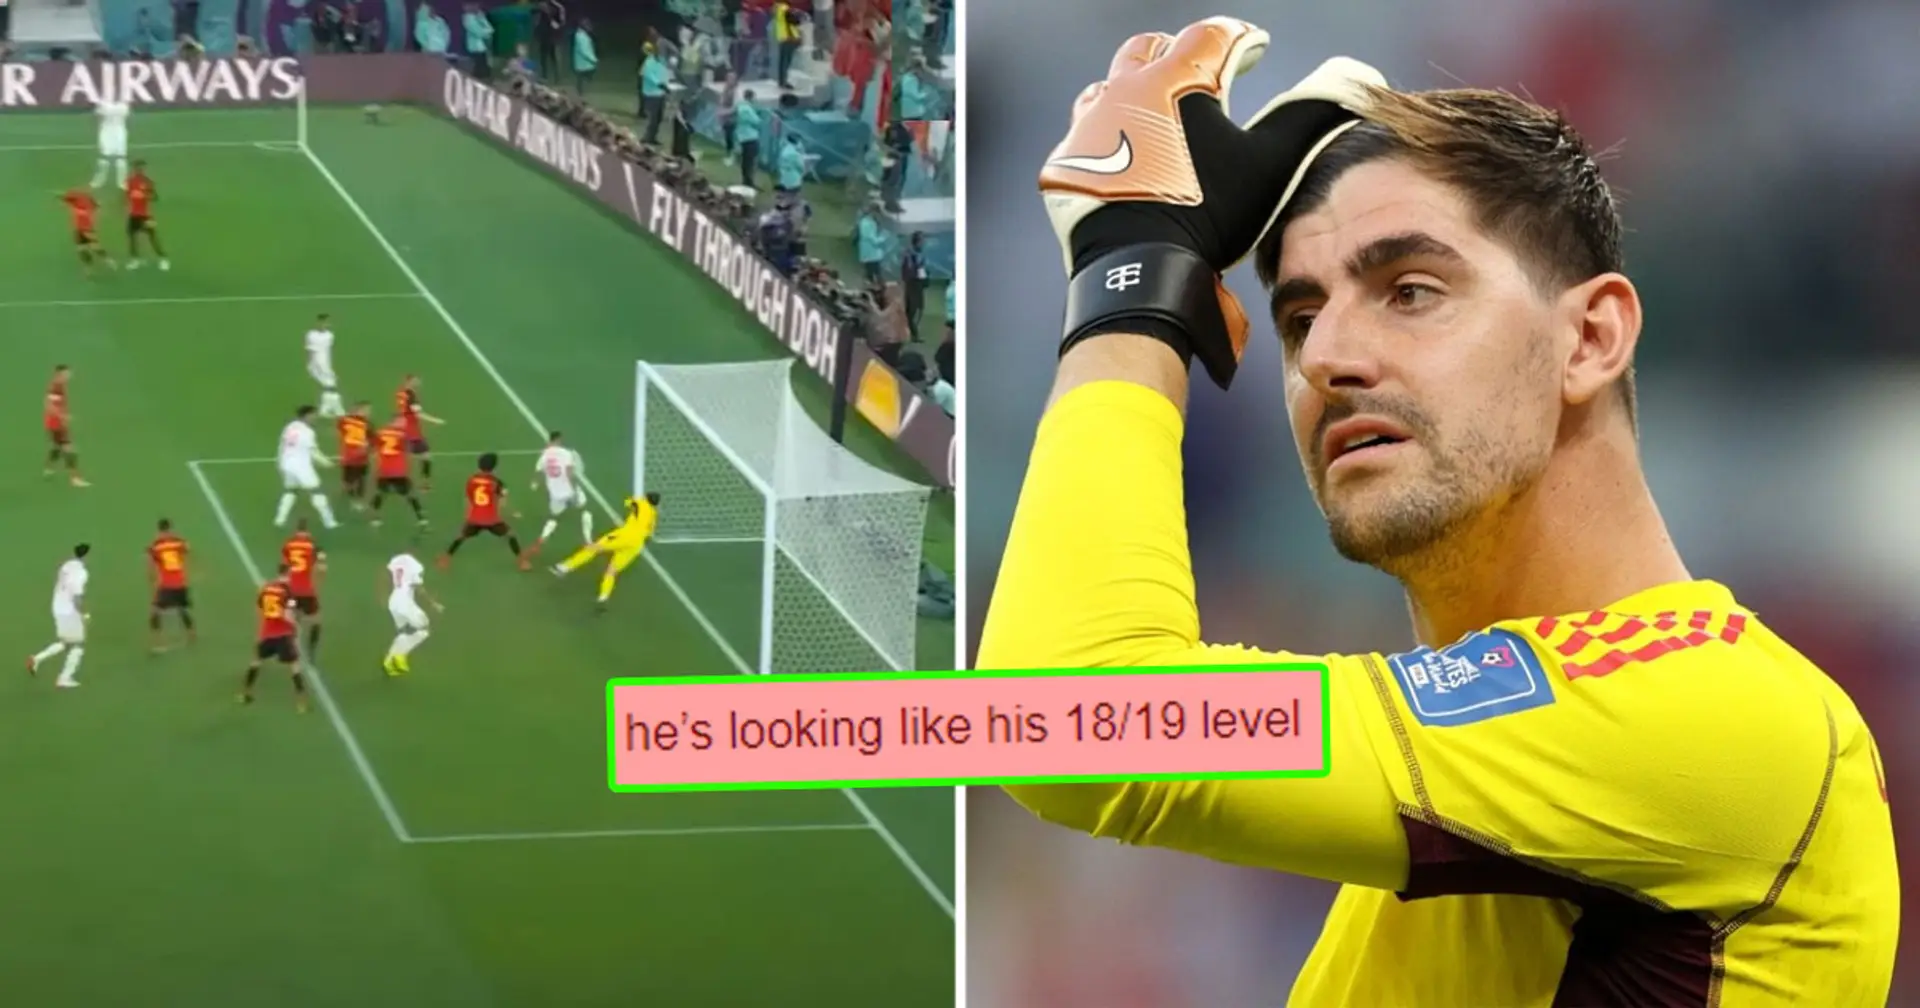 'Couldn't last 2 seasons': Courtois under fire after poor performance for Belgium